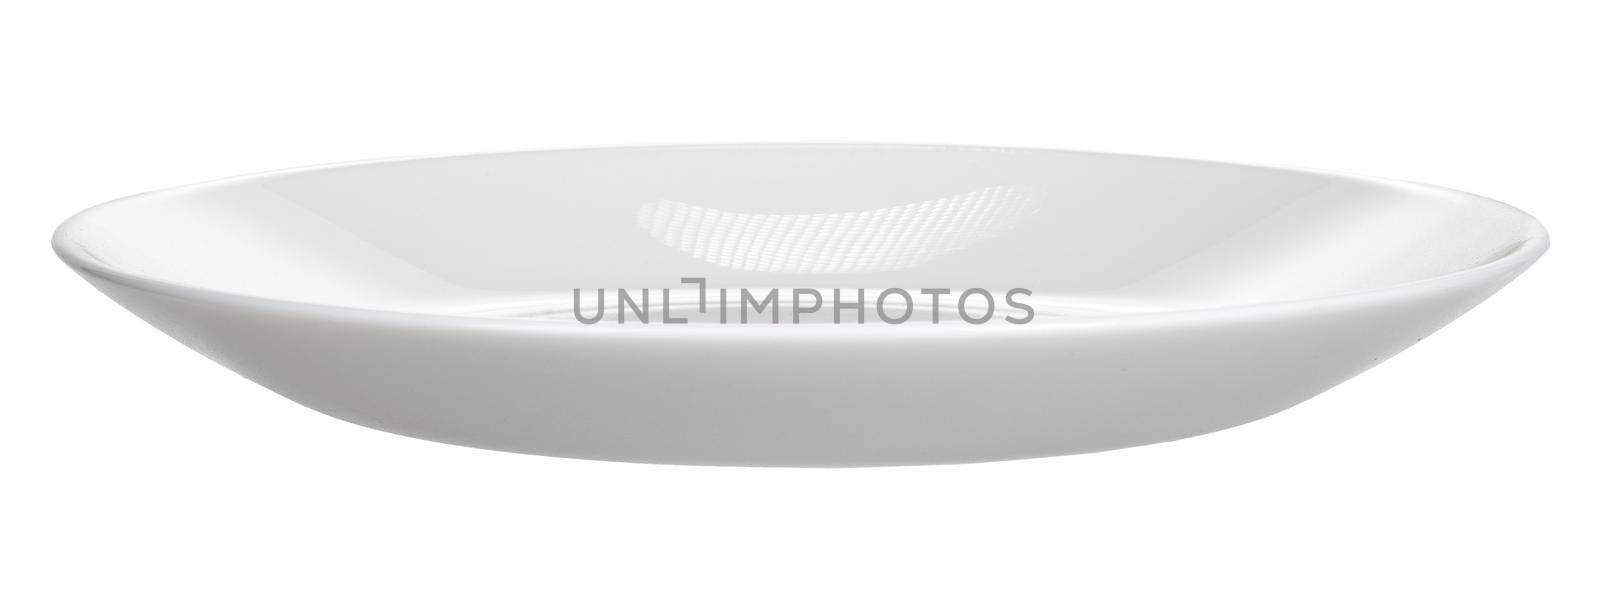 White ceramic plate isolated on white background. Close up.